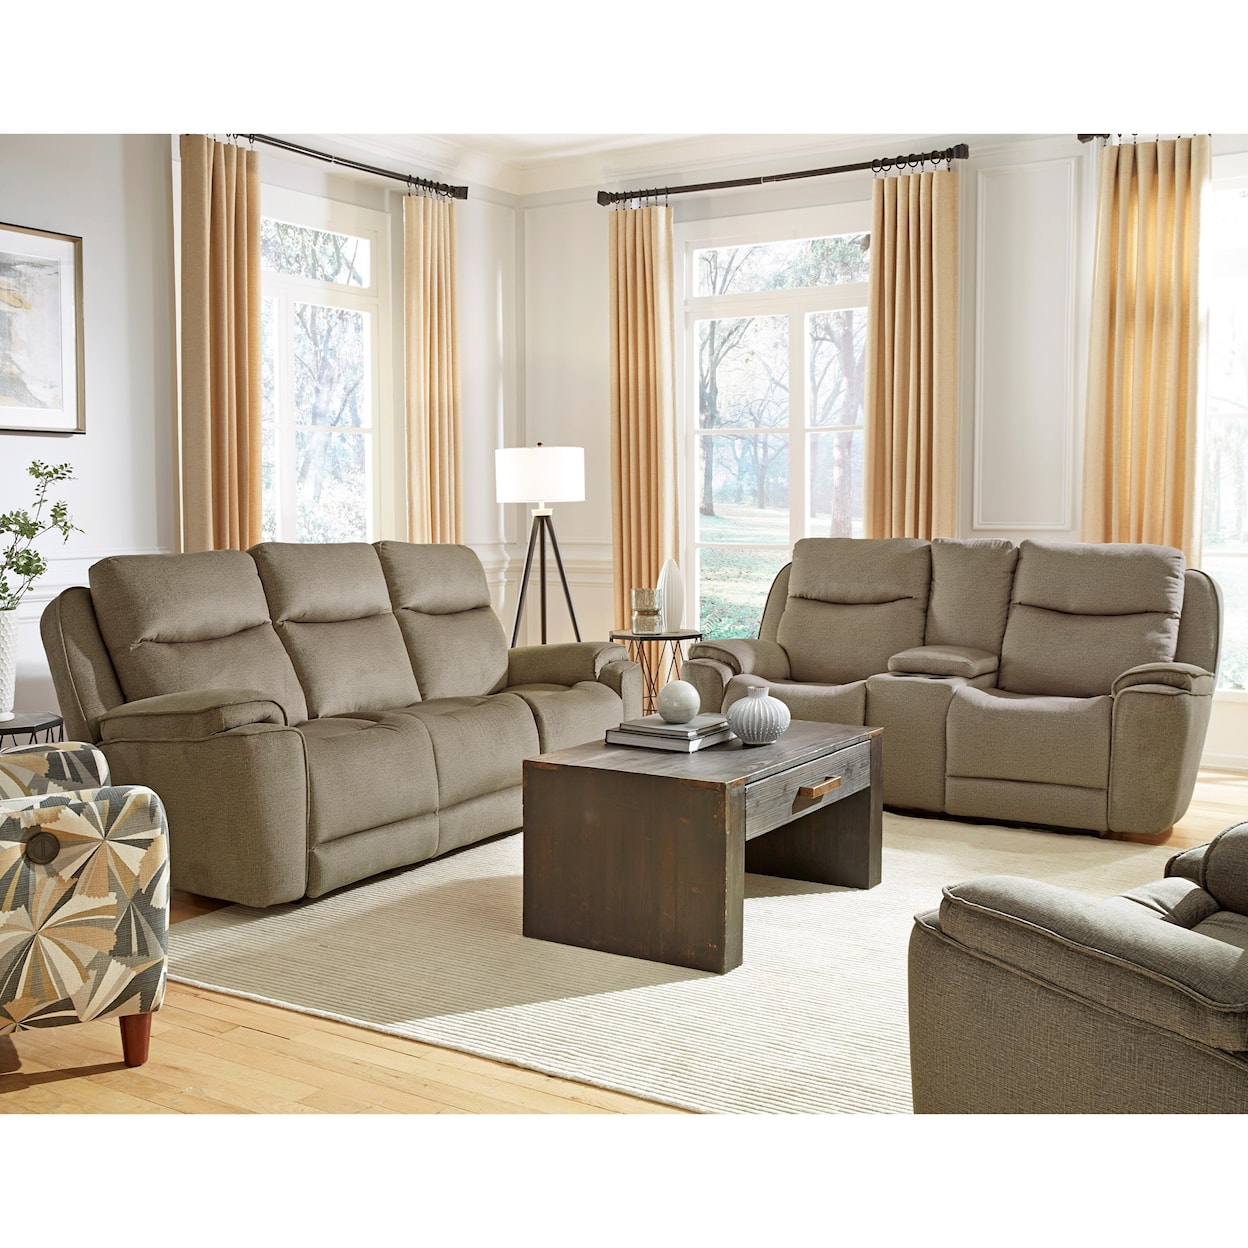 Southern Motion Show Stopper Double Reclining Sofa